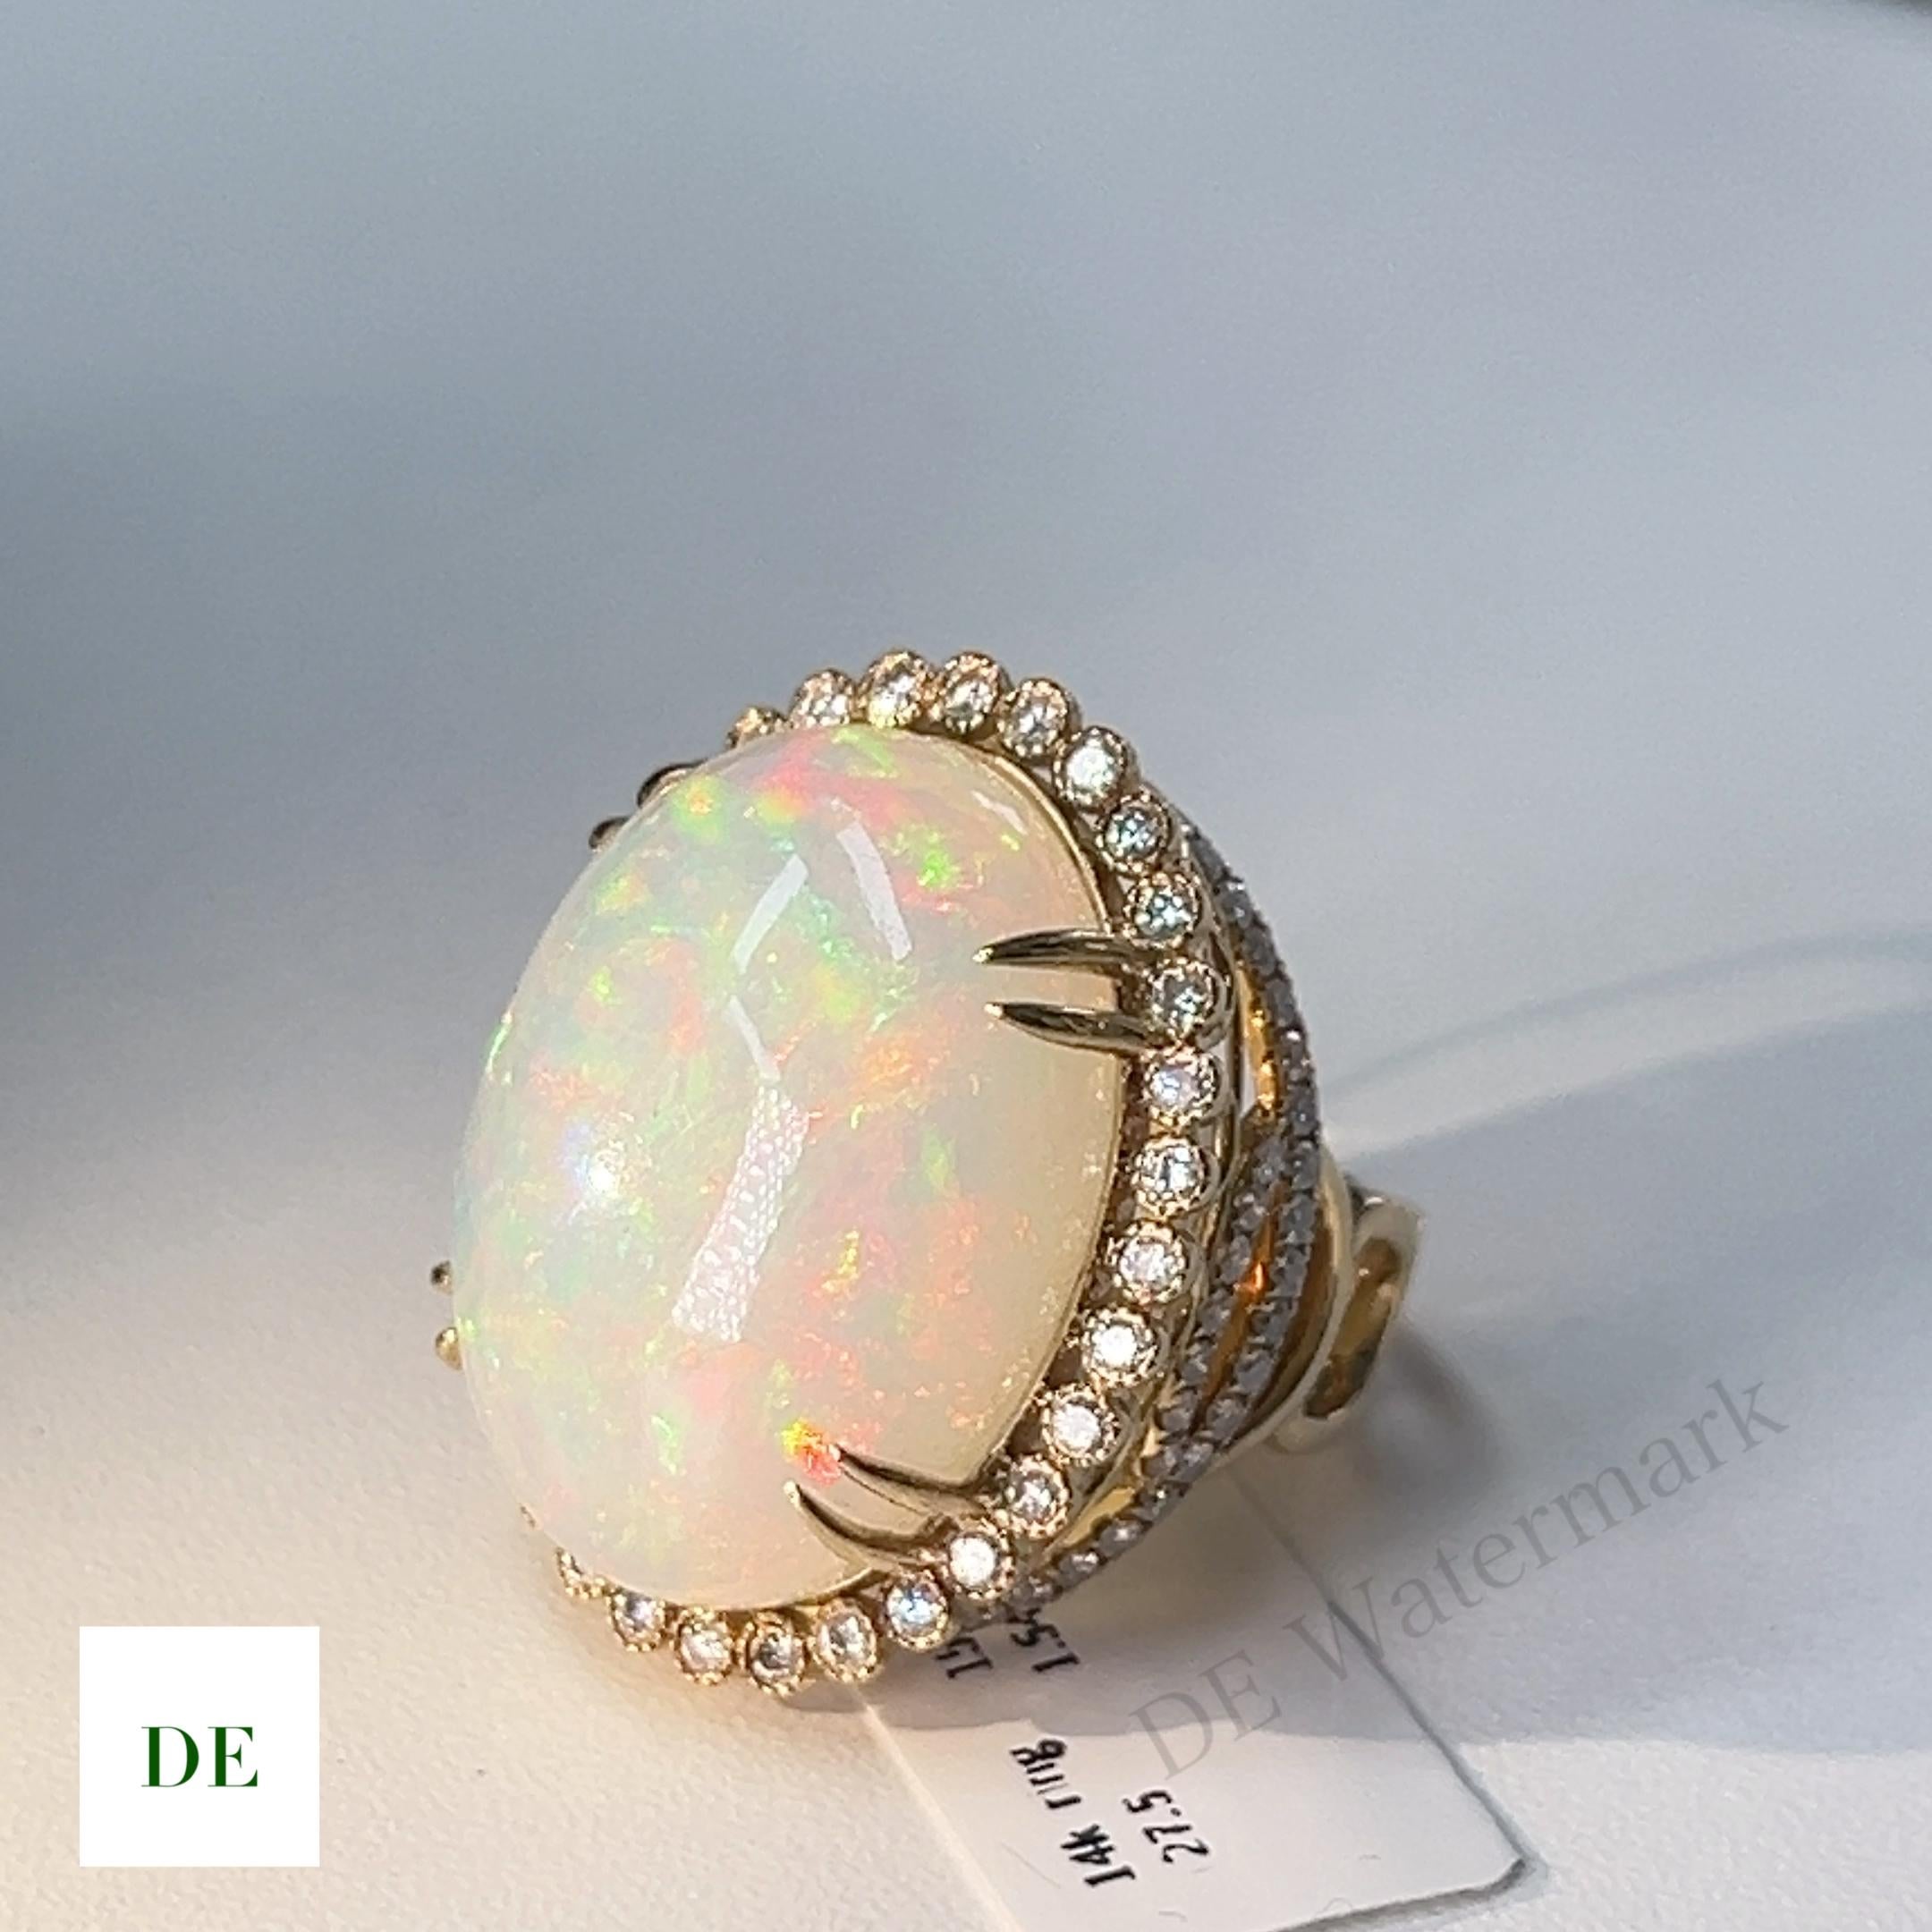 This opal and diamond ring is a rare and unique piece of jewelry that is sure to capture your heart. The centerpiece of the ring is a natural opal that weighs an impressive 27.5 carats. The opal's play of color is breathtaking, showing a range of